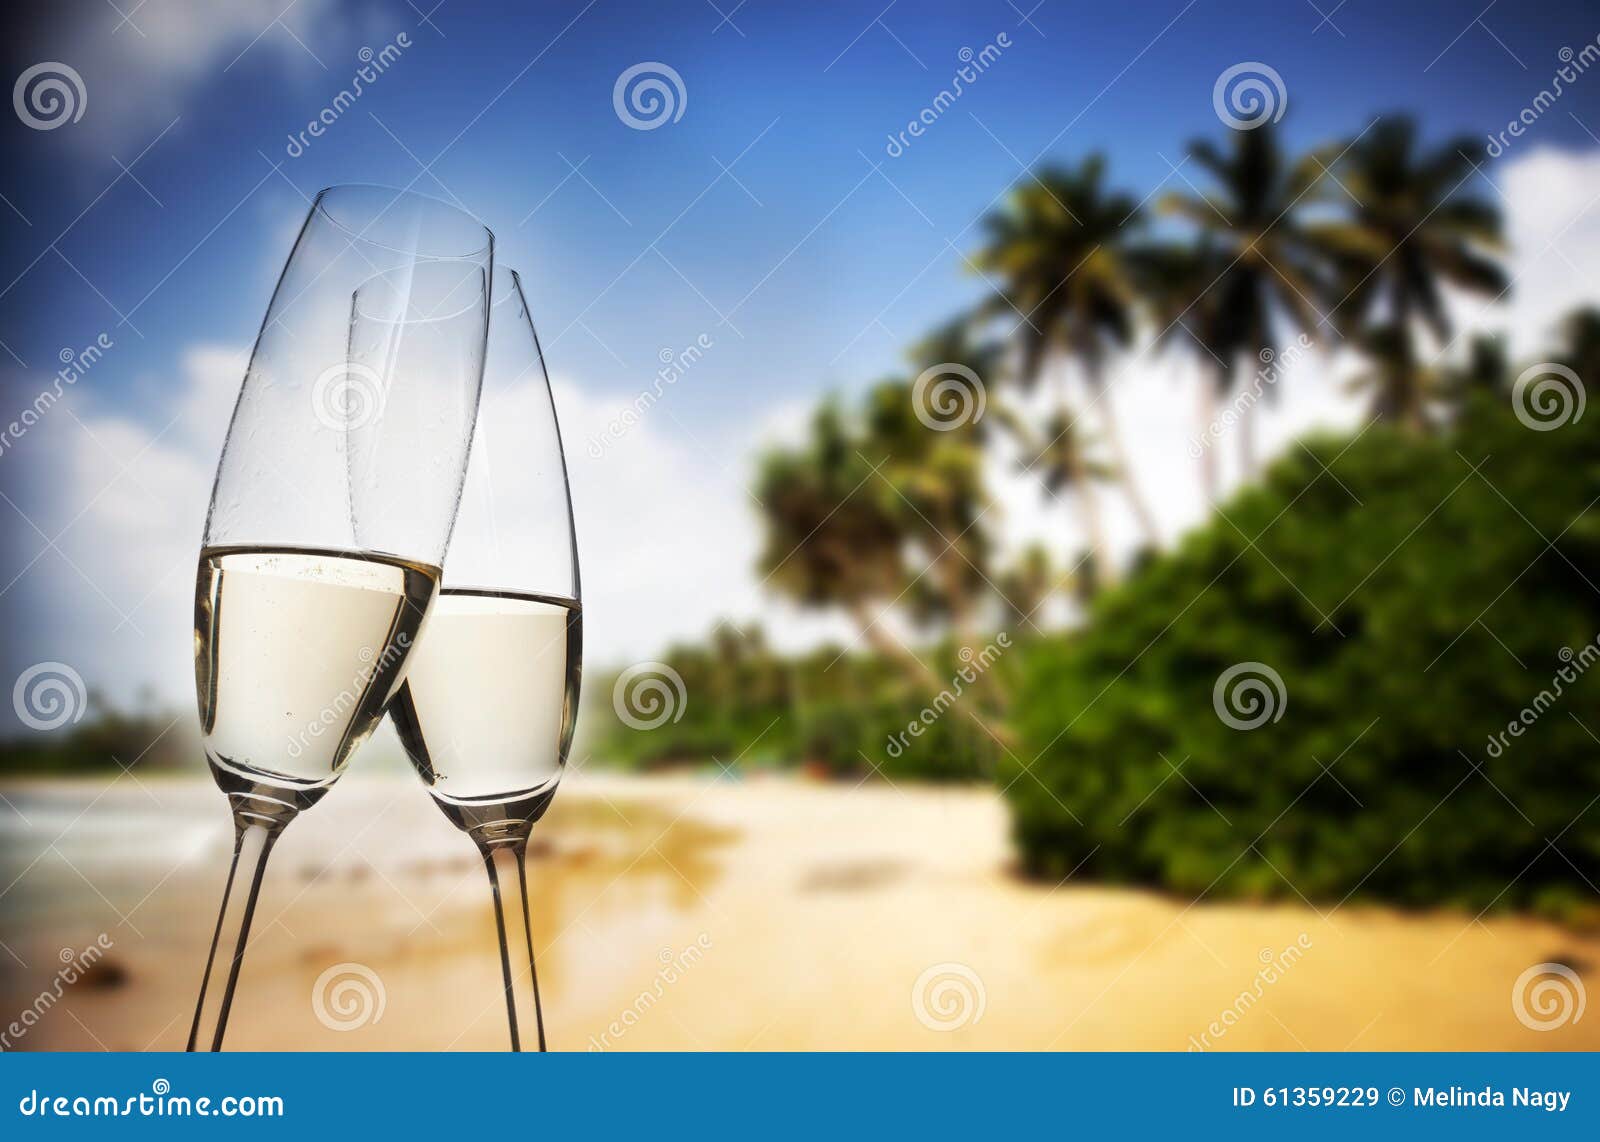 Champagne Glasses On Tropical Beach Exotic New Year Stock Image Image Of Alcohol Drink